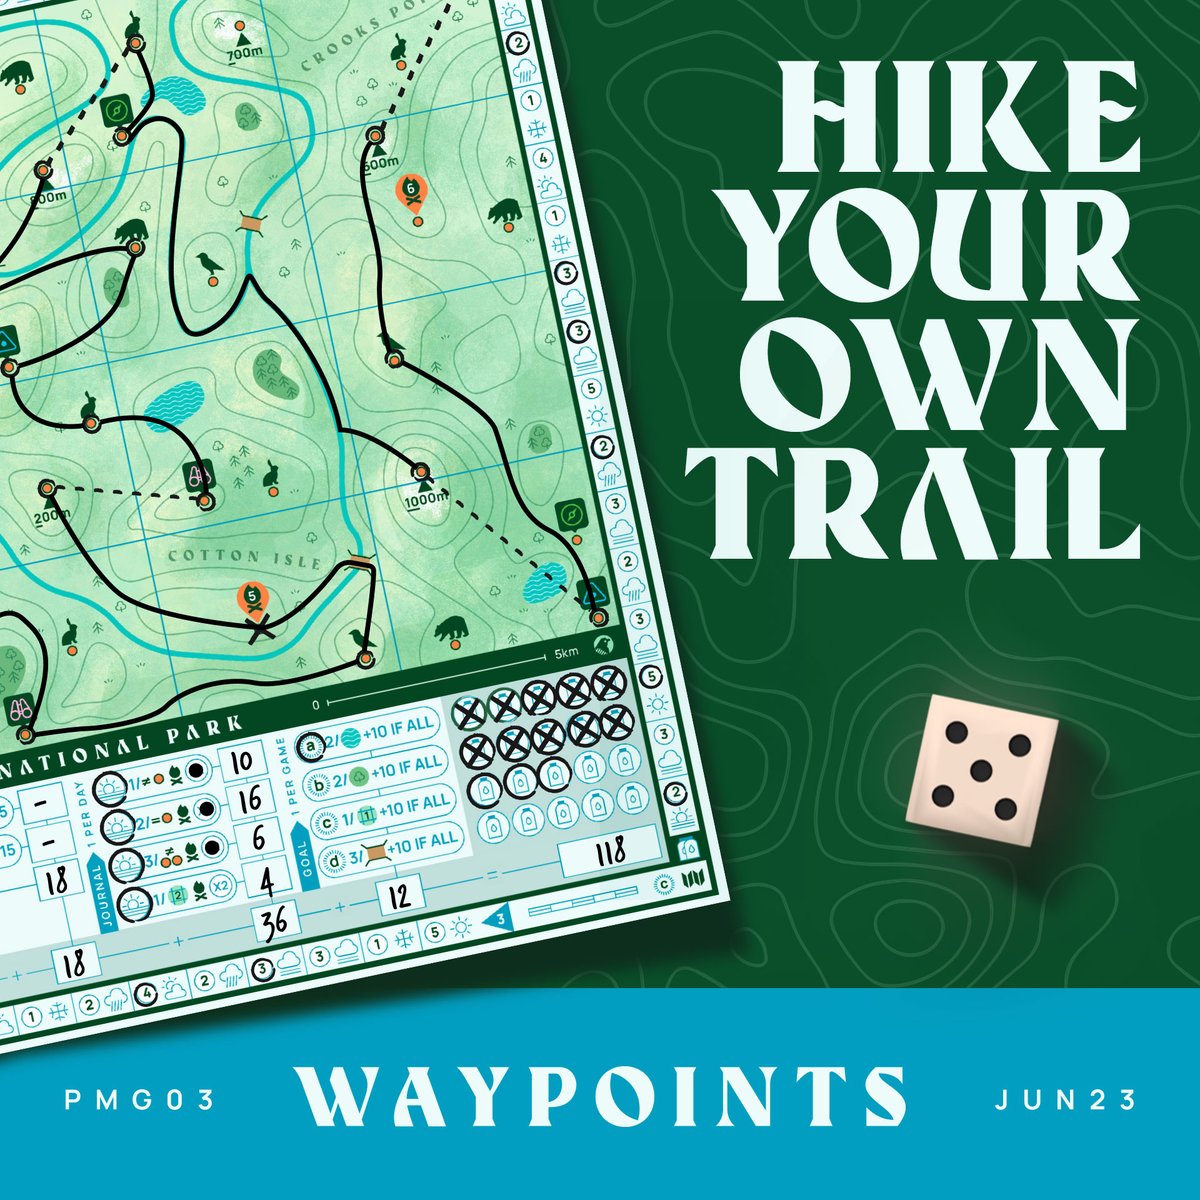 You create your own unique trail in every game of Waypoints. Choose to hike through valleys or over mountains, recording your experiences as you go. 
 
Sign up to get notified when the campaign starts!
 
kickstarter.com/projects/postm…